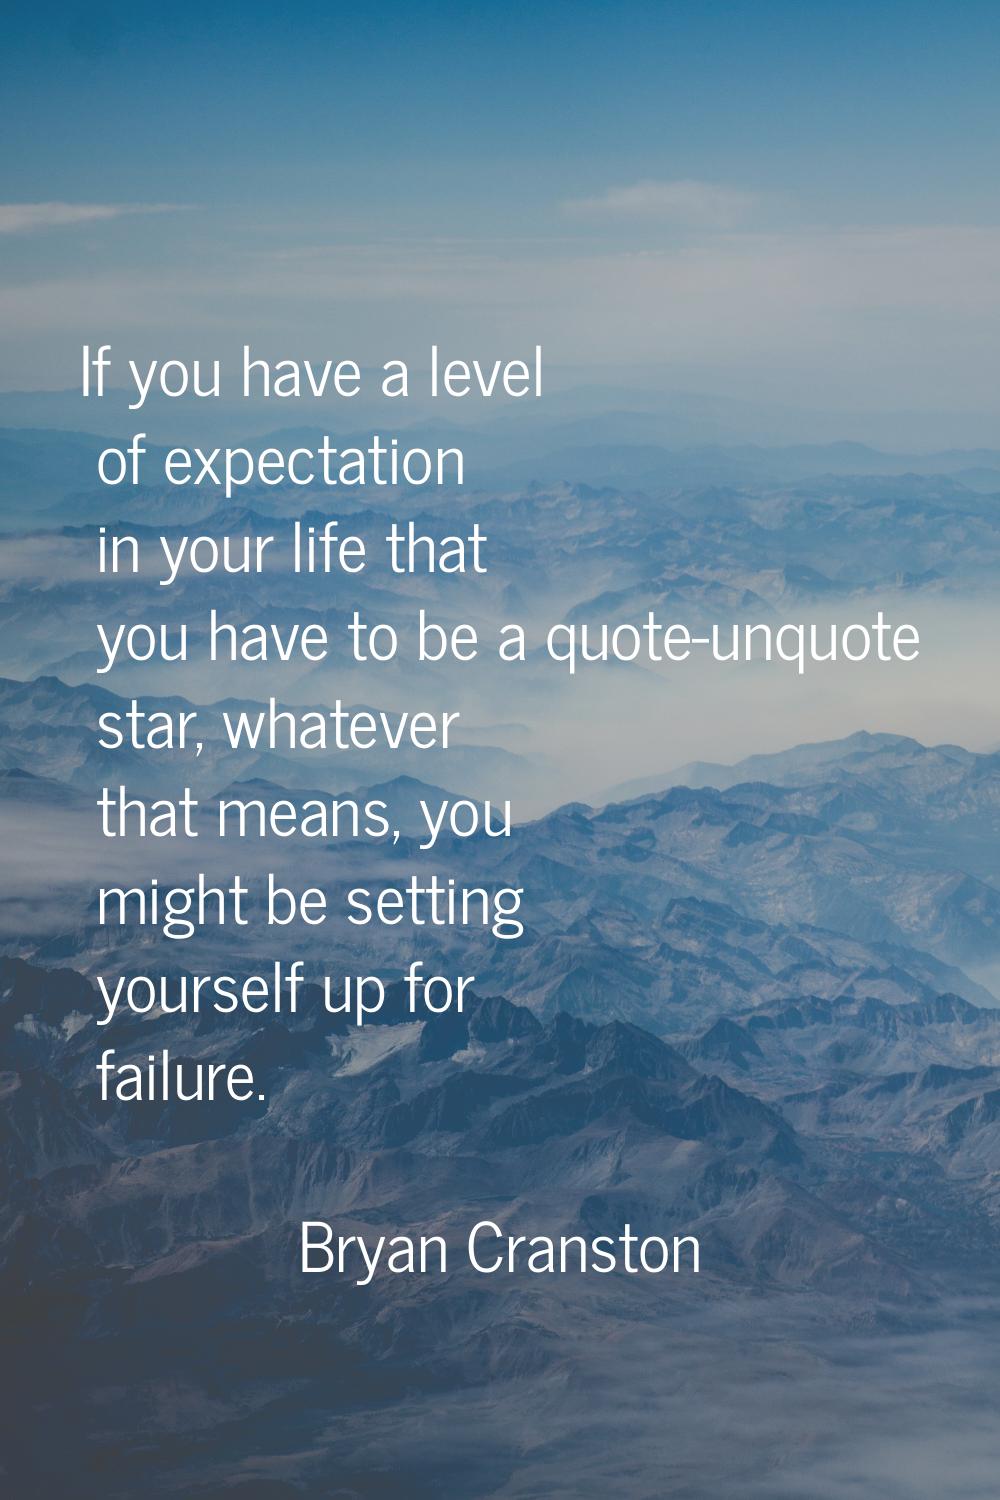 If you have a level of expectation in your life that you have to be a quote-unquote star, whatever 